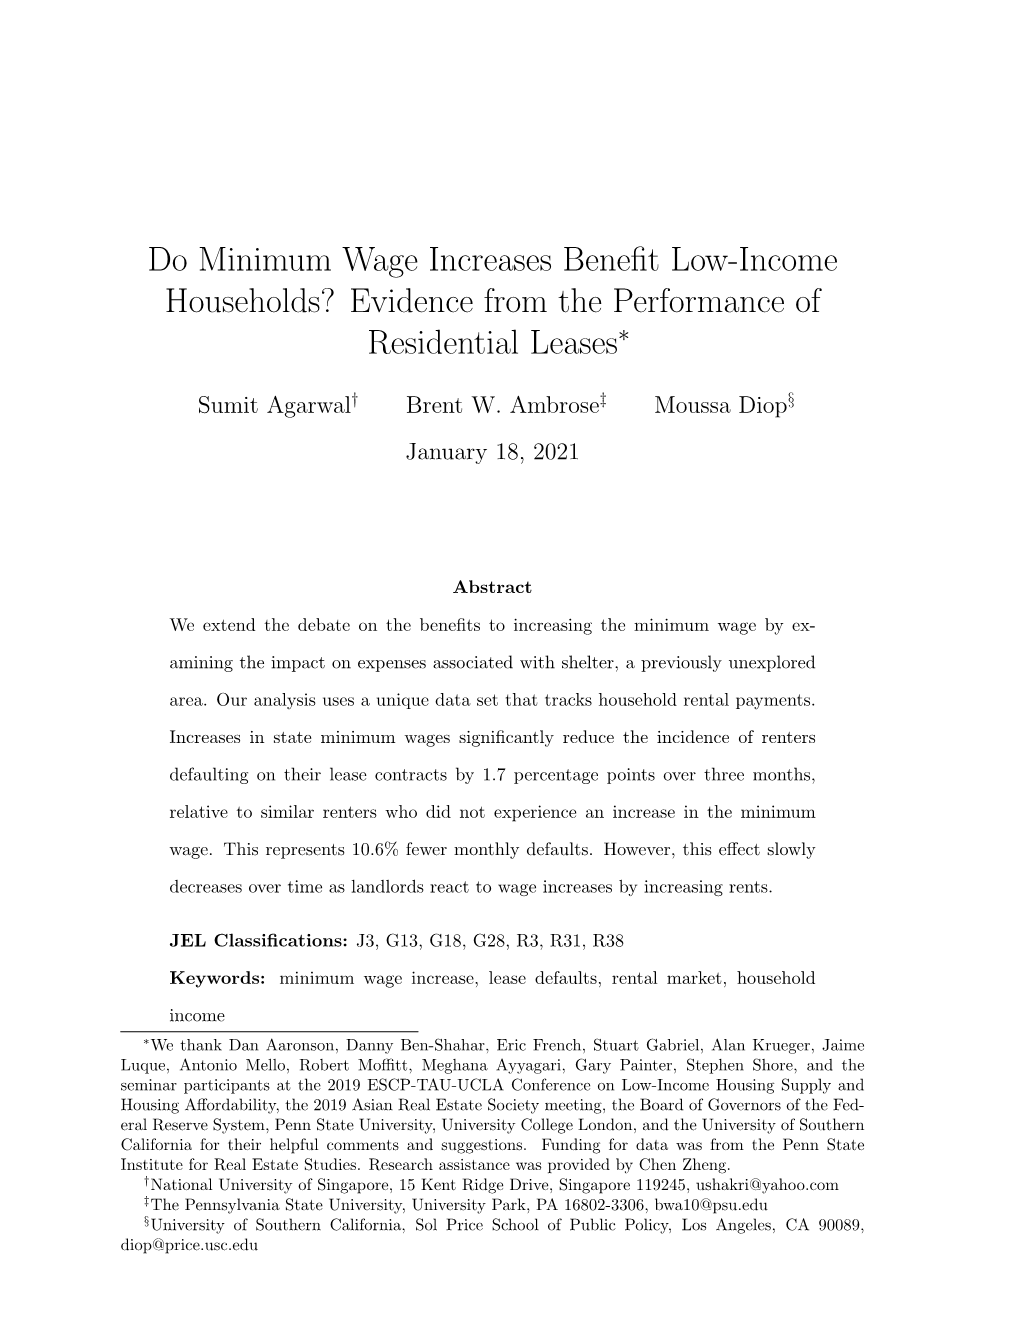 Do Minimum Wage Increases Benefit Low-Income